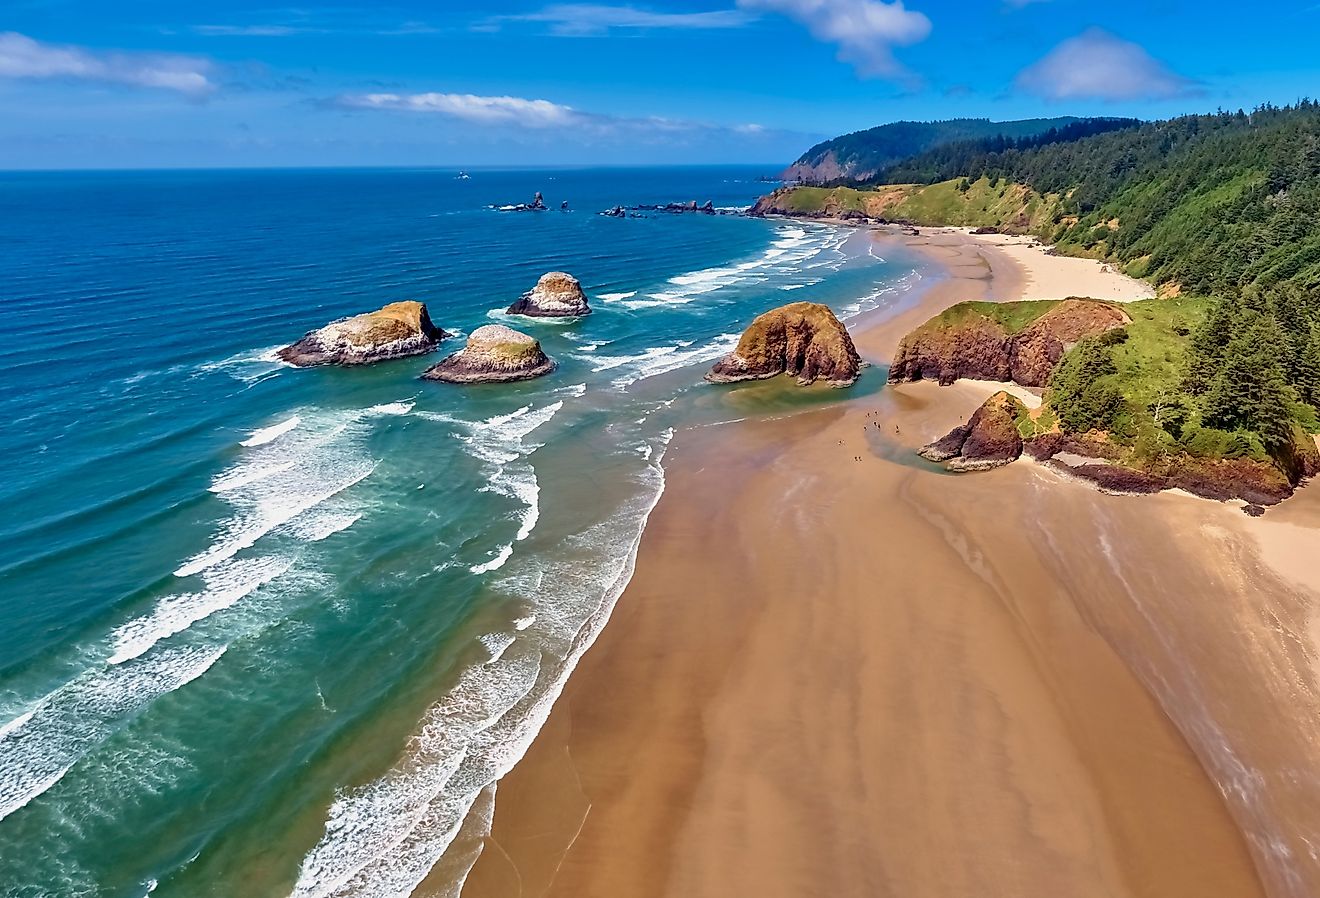 Aerial panorama shot at approximately 350 feet above Cannon Beach looking towards Ecola State Park.